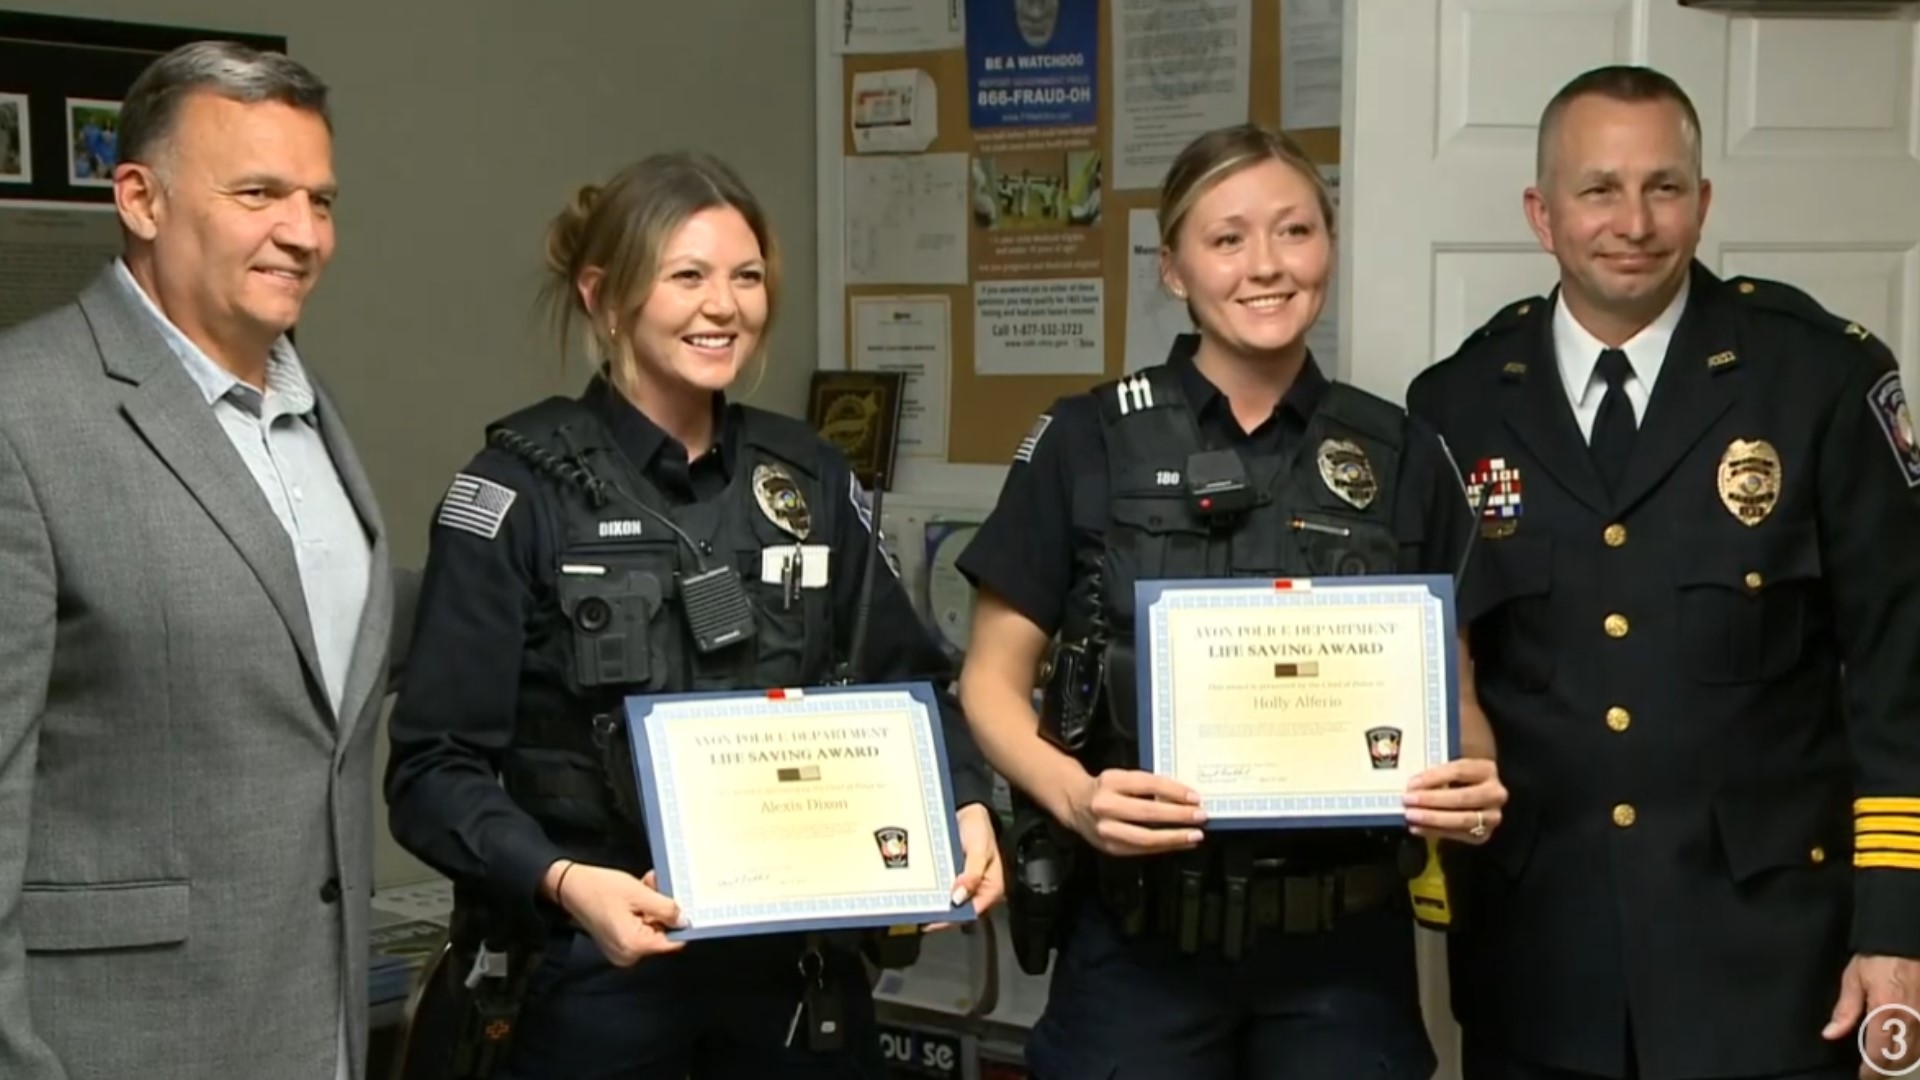 Officers Alexis Dixon and Holly Alferio were recognized with the department's Life Saving Award during Monday's Avon City Council meeting.